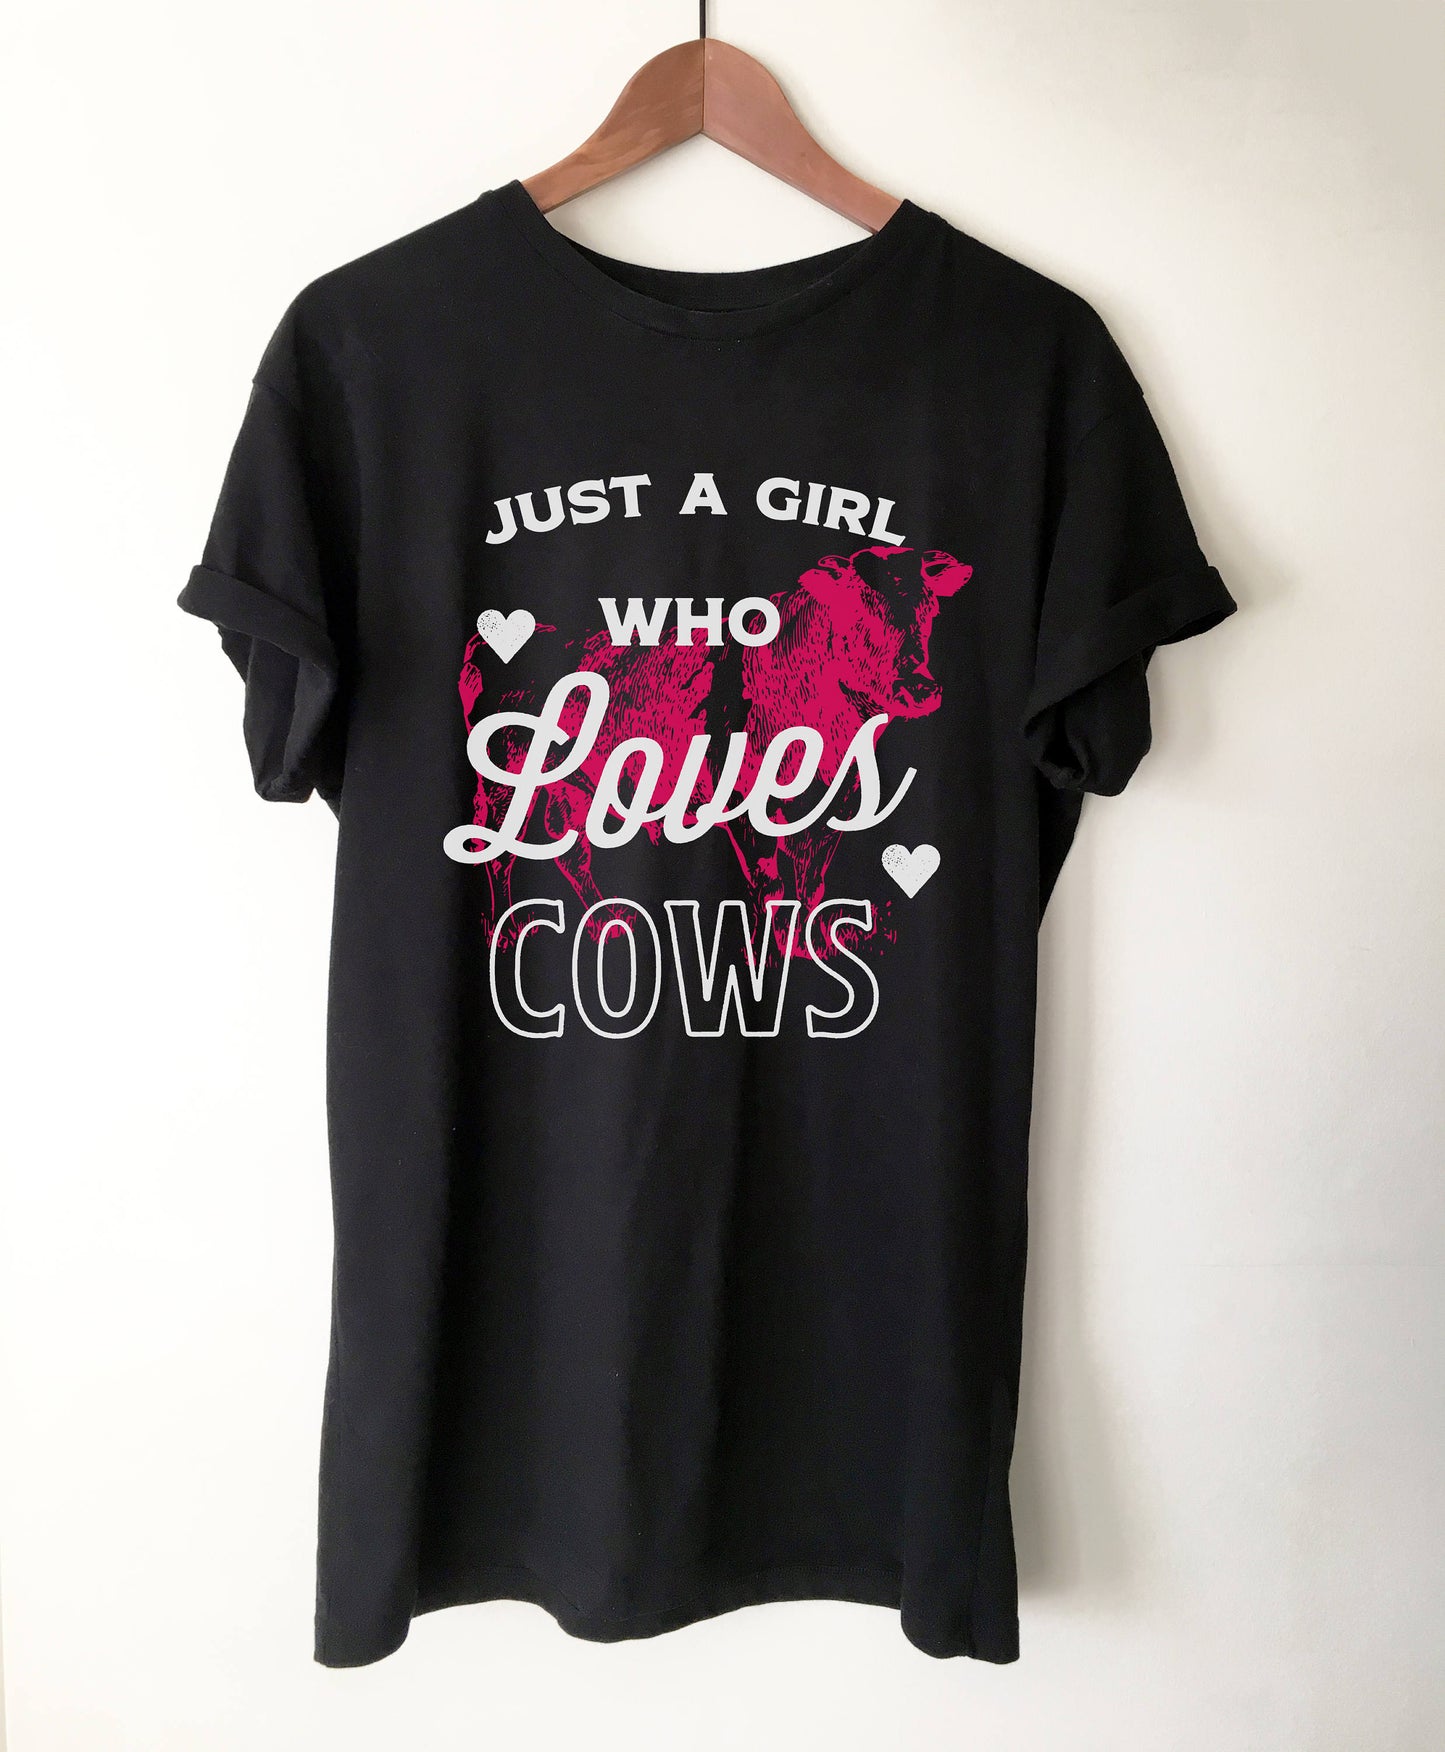 Just A Girl Who Loves Cows Unisex